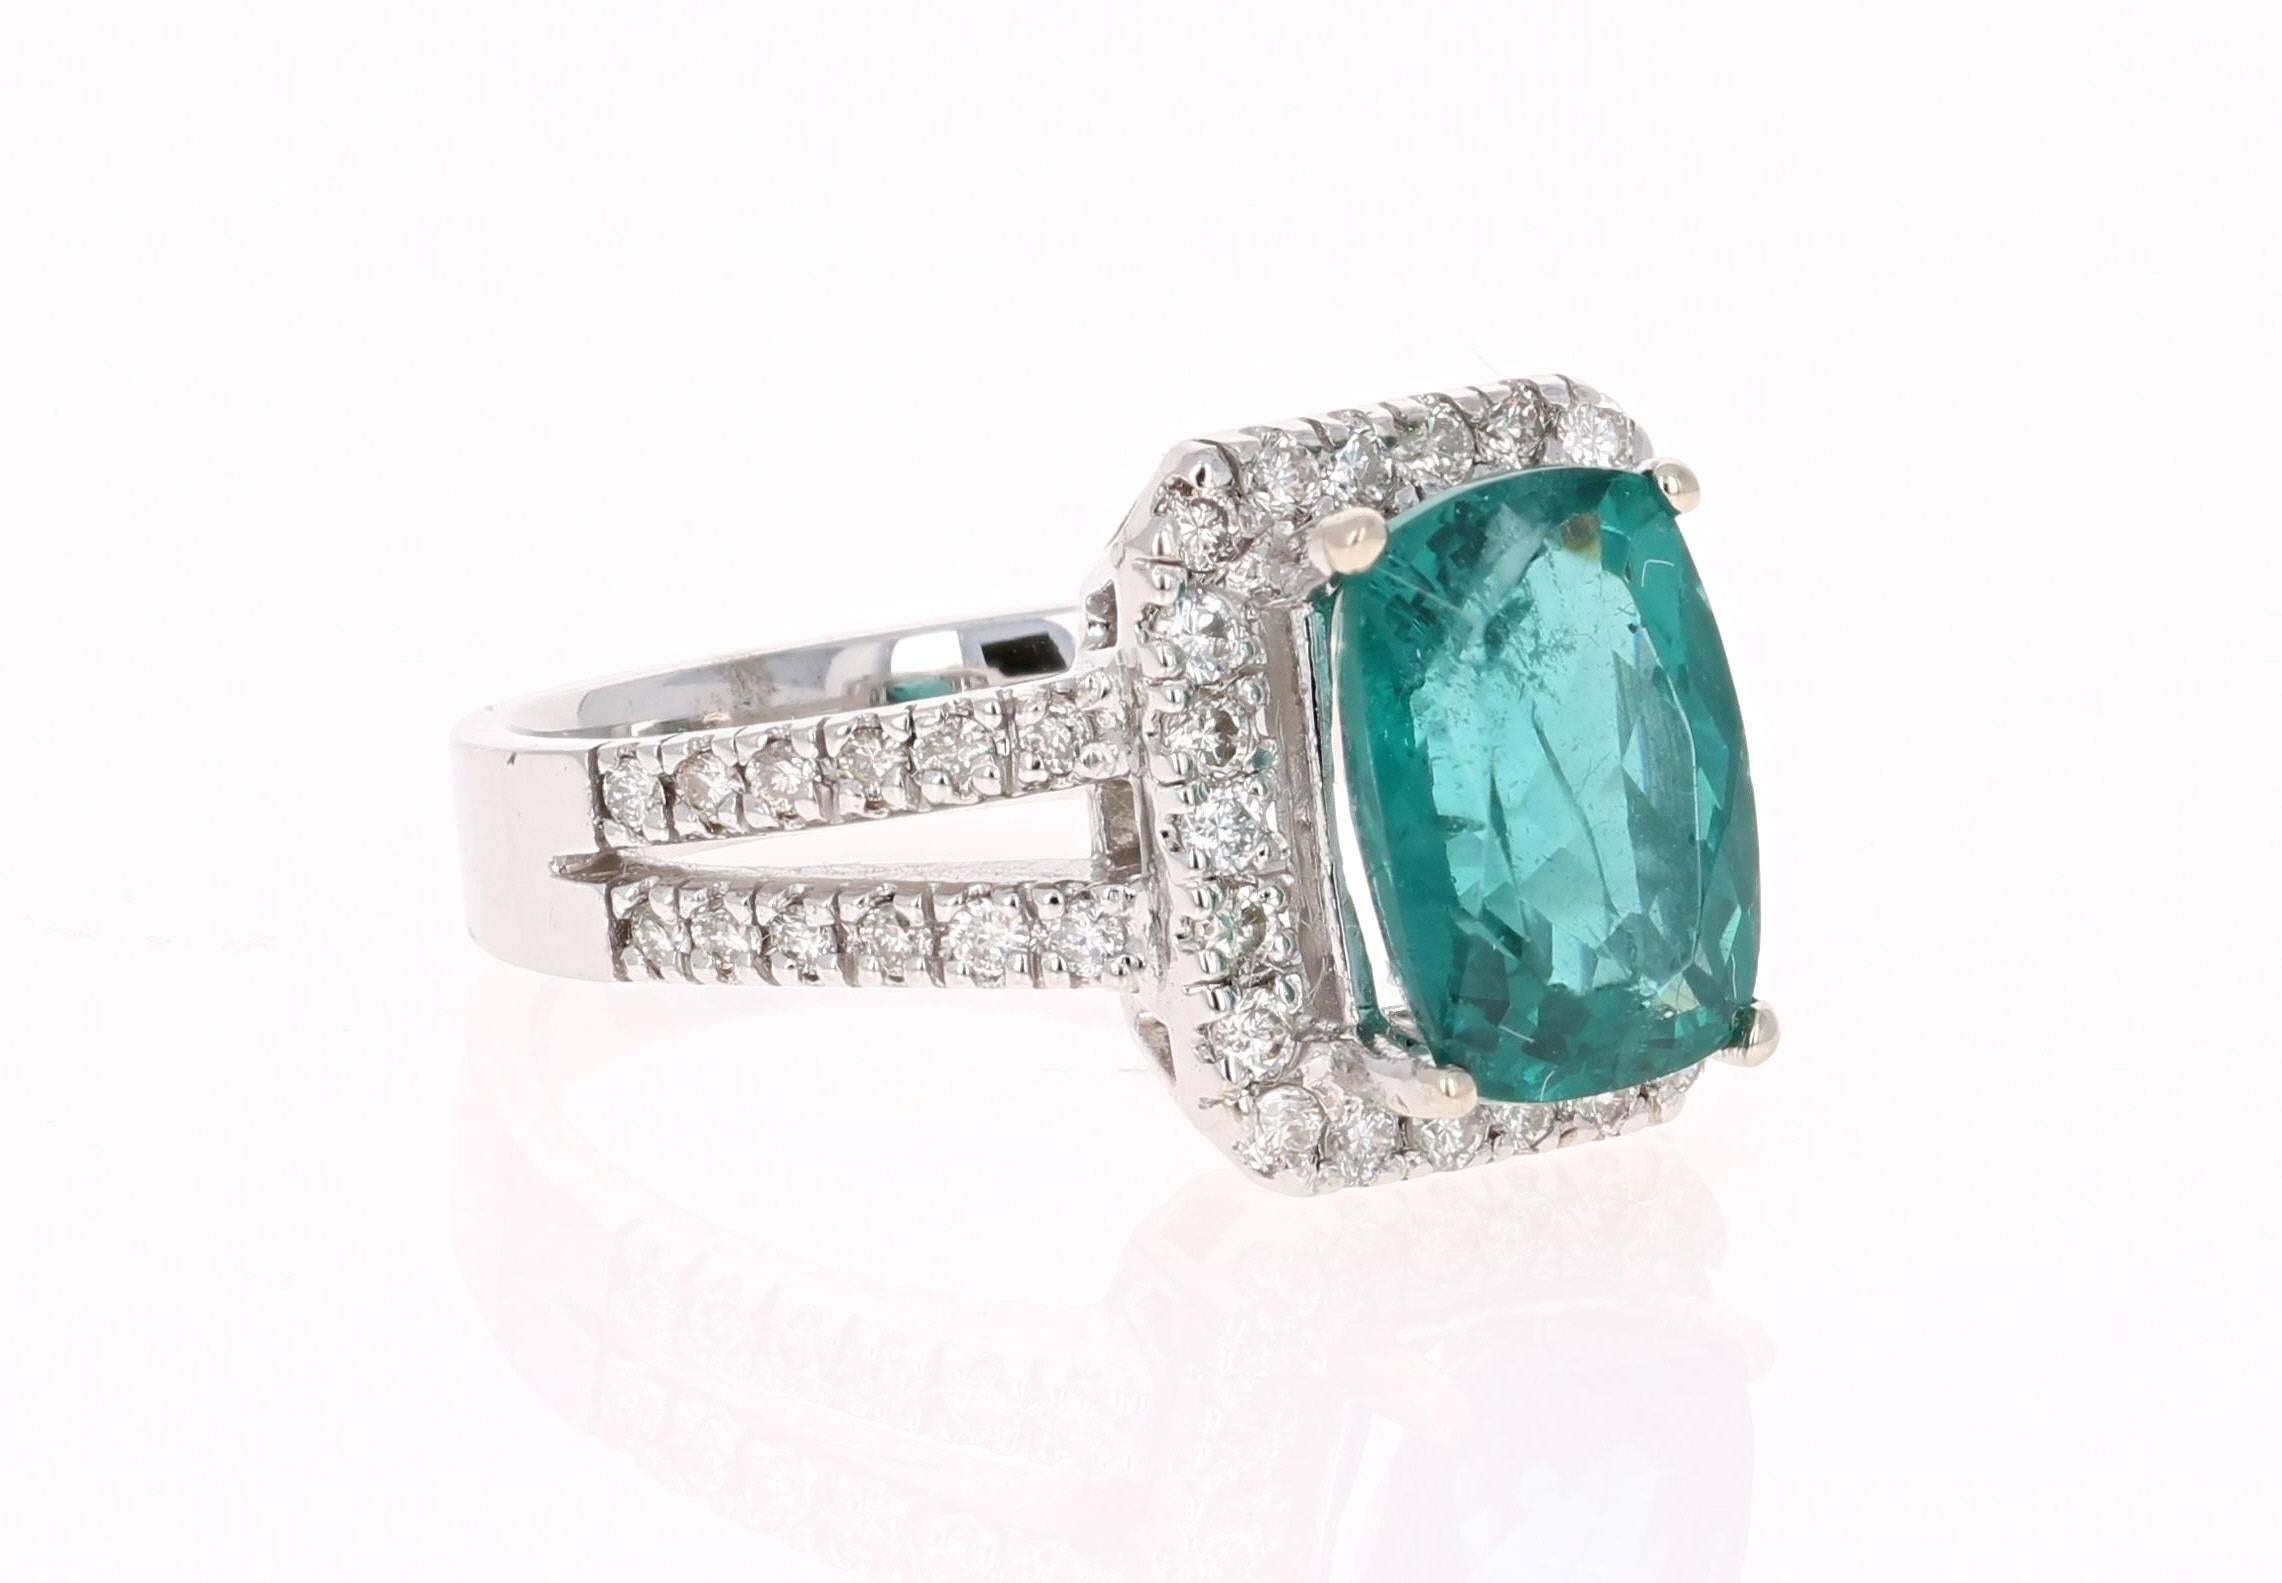 Stunning 3.95 Carat Apatite Diamond White Gold Cocktail Ring that is sure to elevate your accessory collection or it can even be a great substitute for a promise Ring!

The ring has a 3.36 carat Apatite set in the center of the ring surrounded by 46